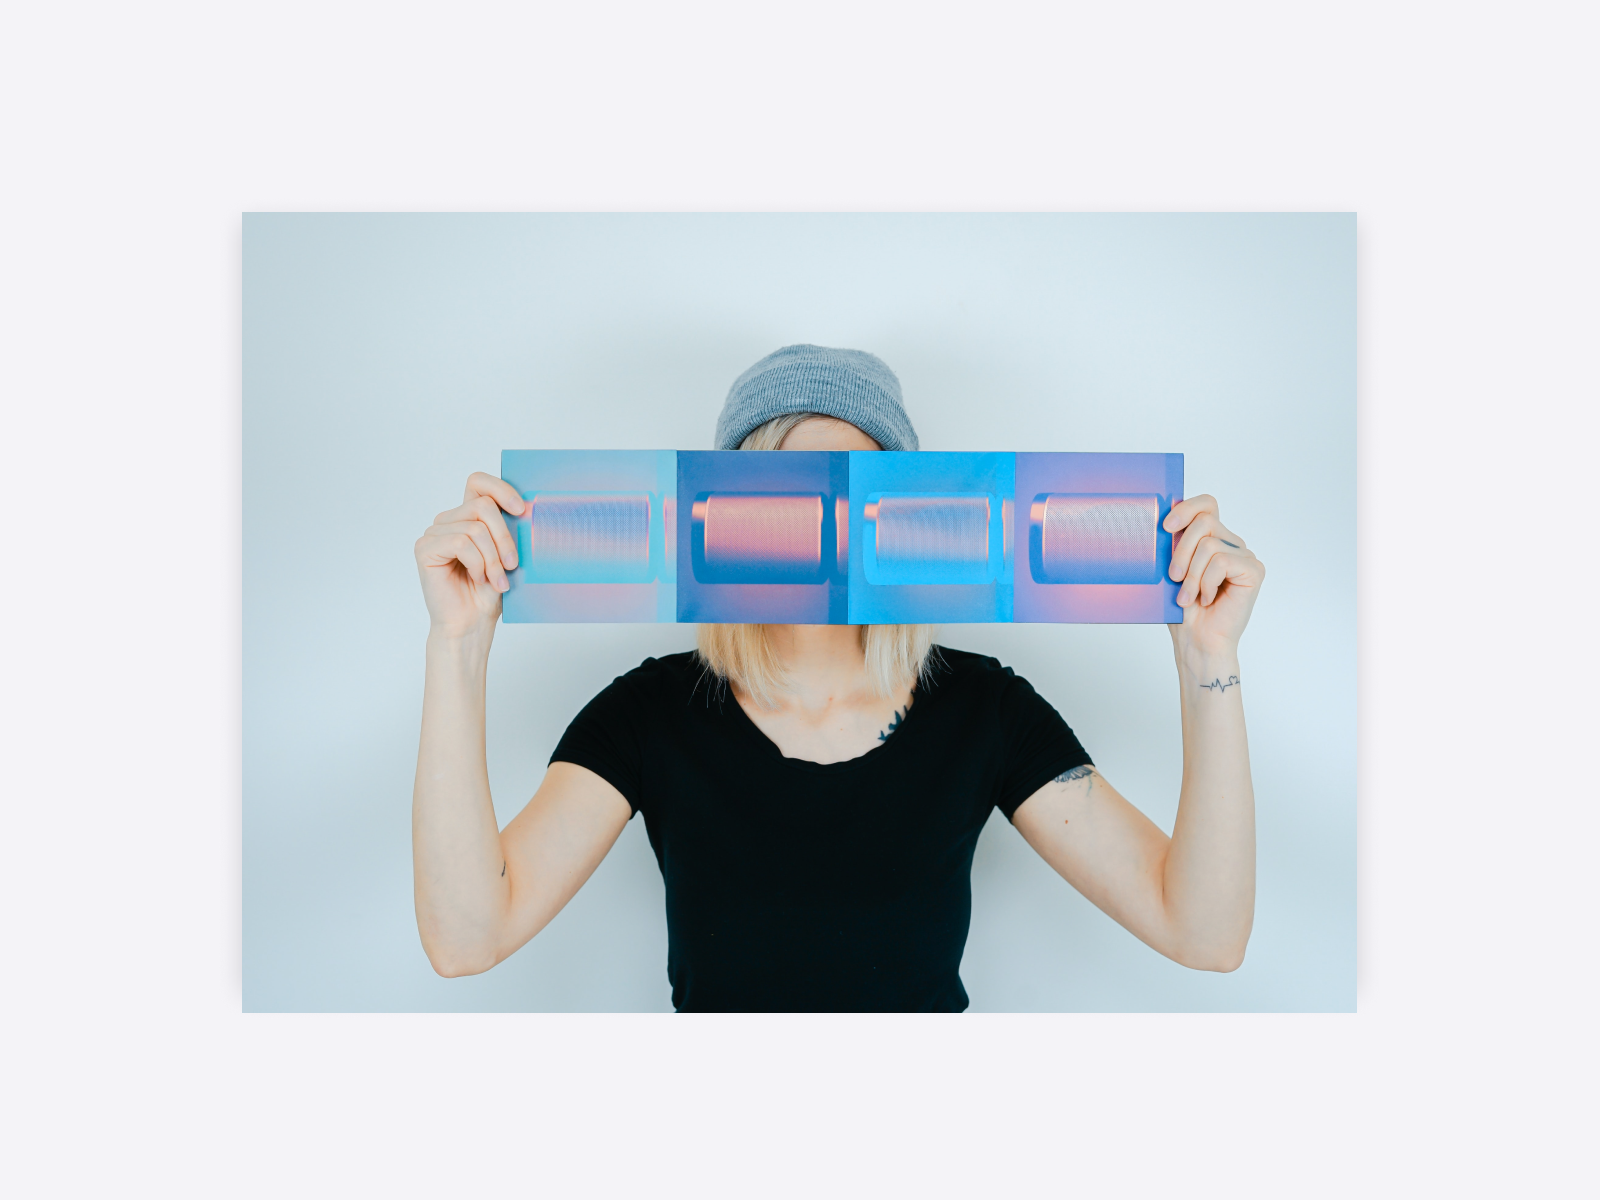 A photo of a female designer holding up photos with gradient colors in front of her face.